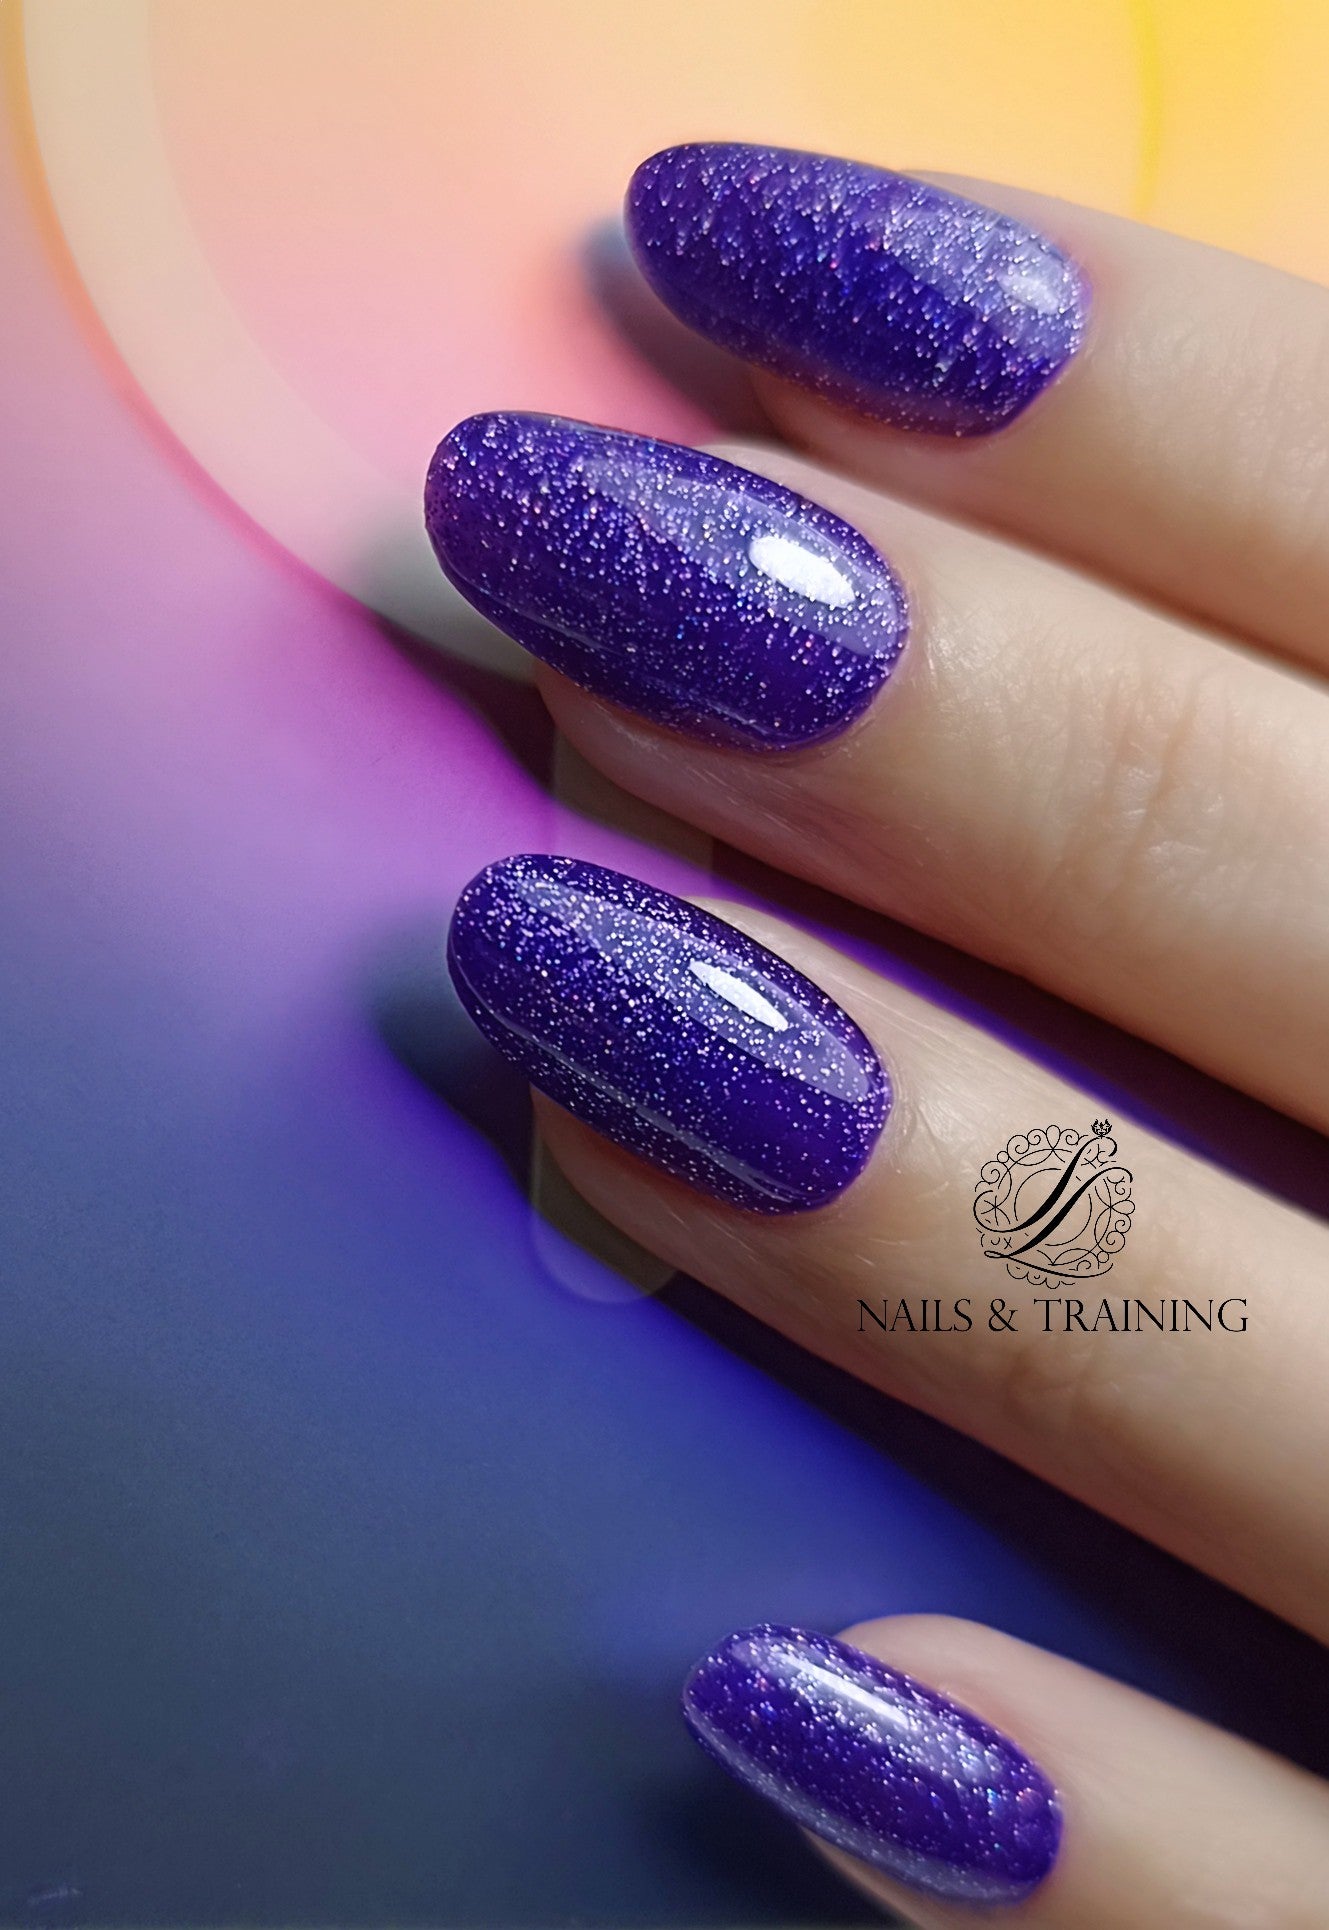 POLYGEL NAILS EXTENSIONS COURSE